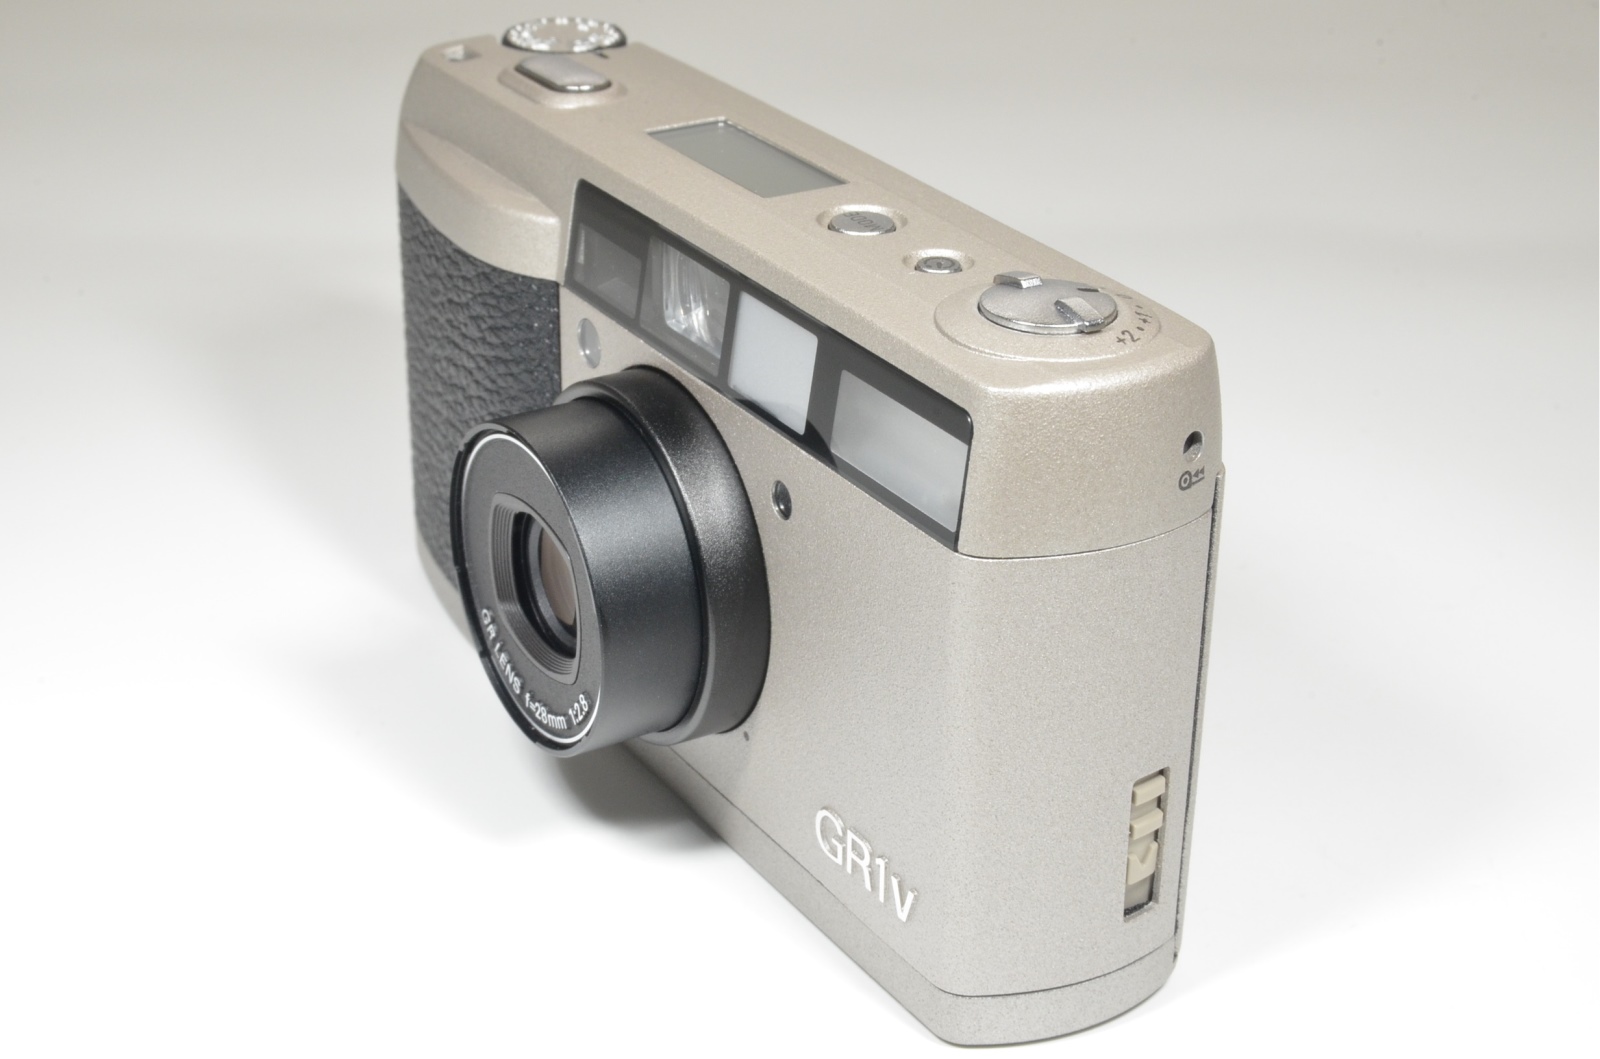 RICOH GR1v Date Silver 28mm f2.8 Point & Shoot 35mm Film